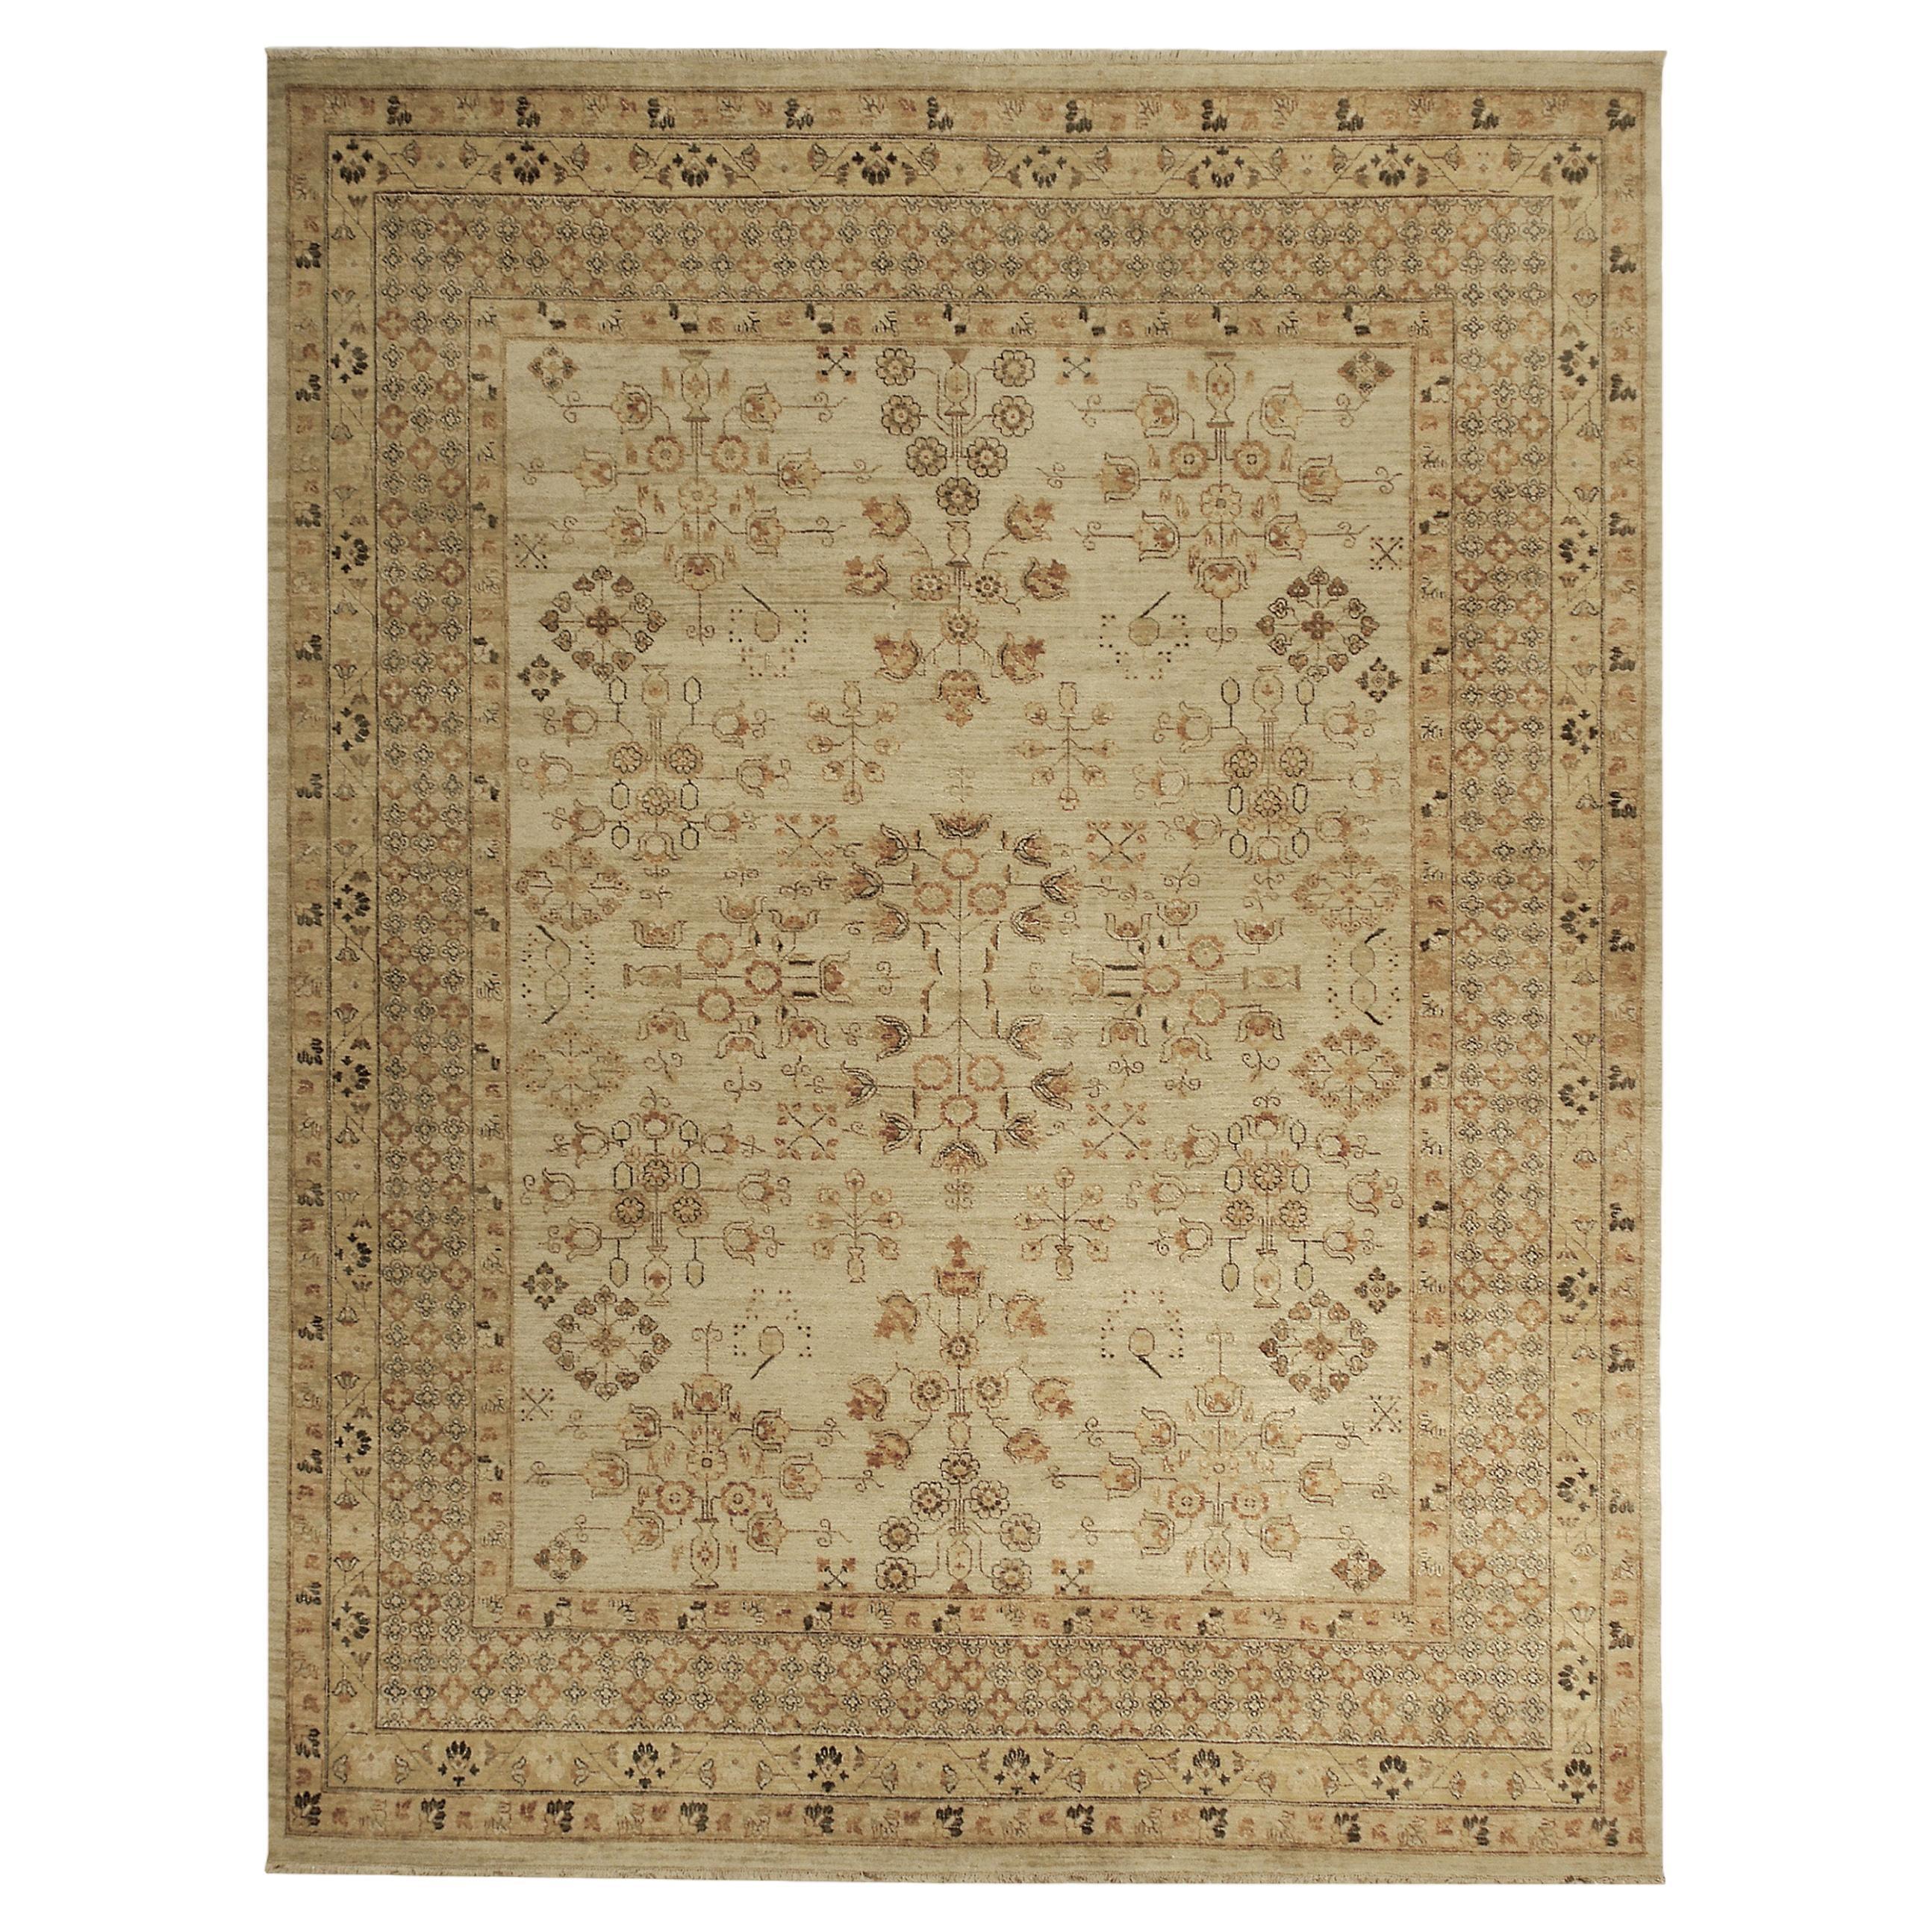 Luxury Traditional Hand-Knotted Cream/Beige 12x24 Rug